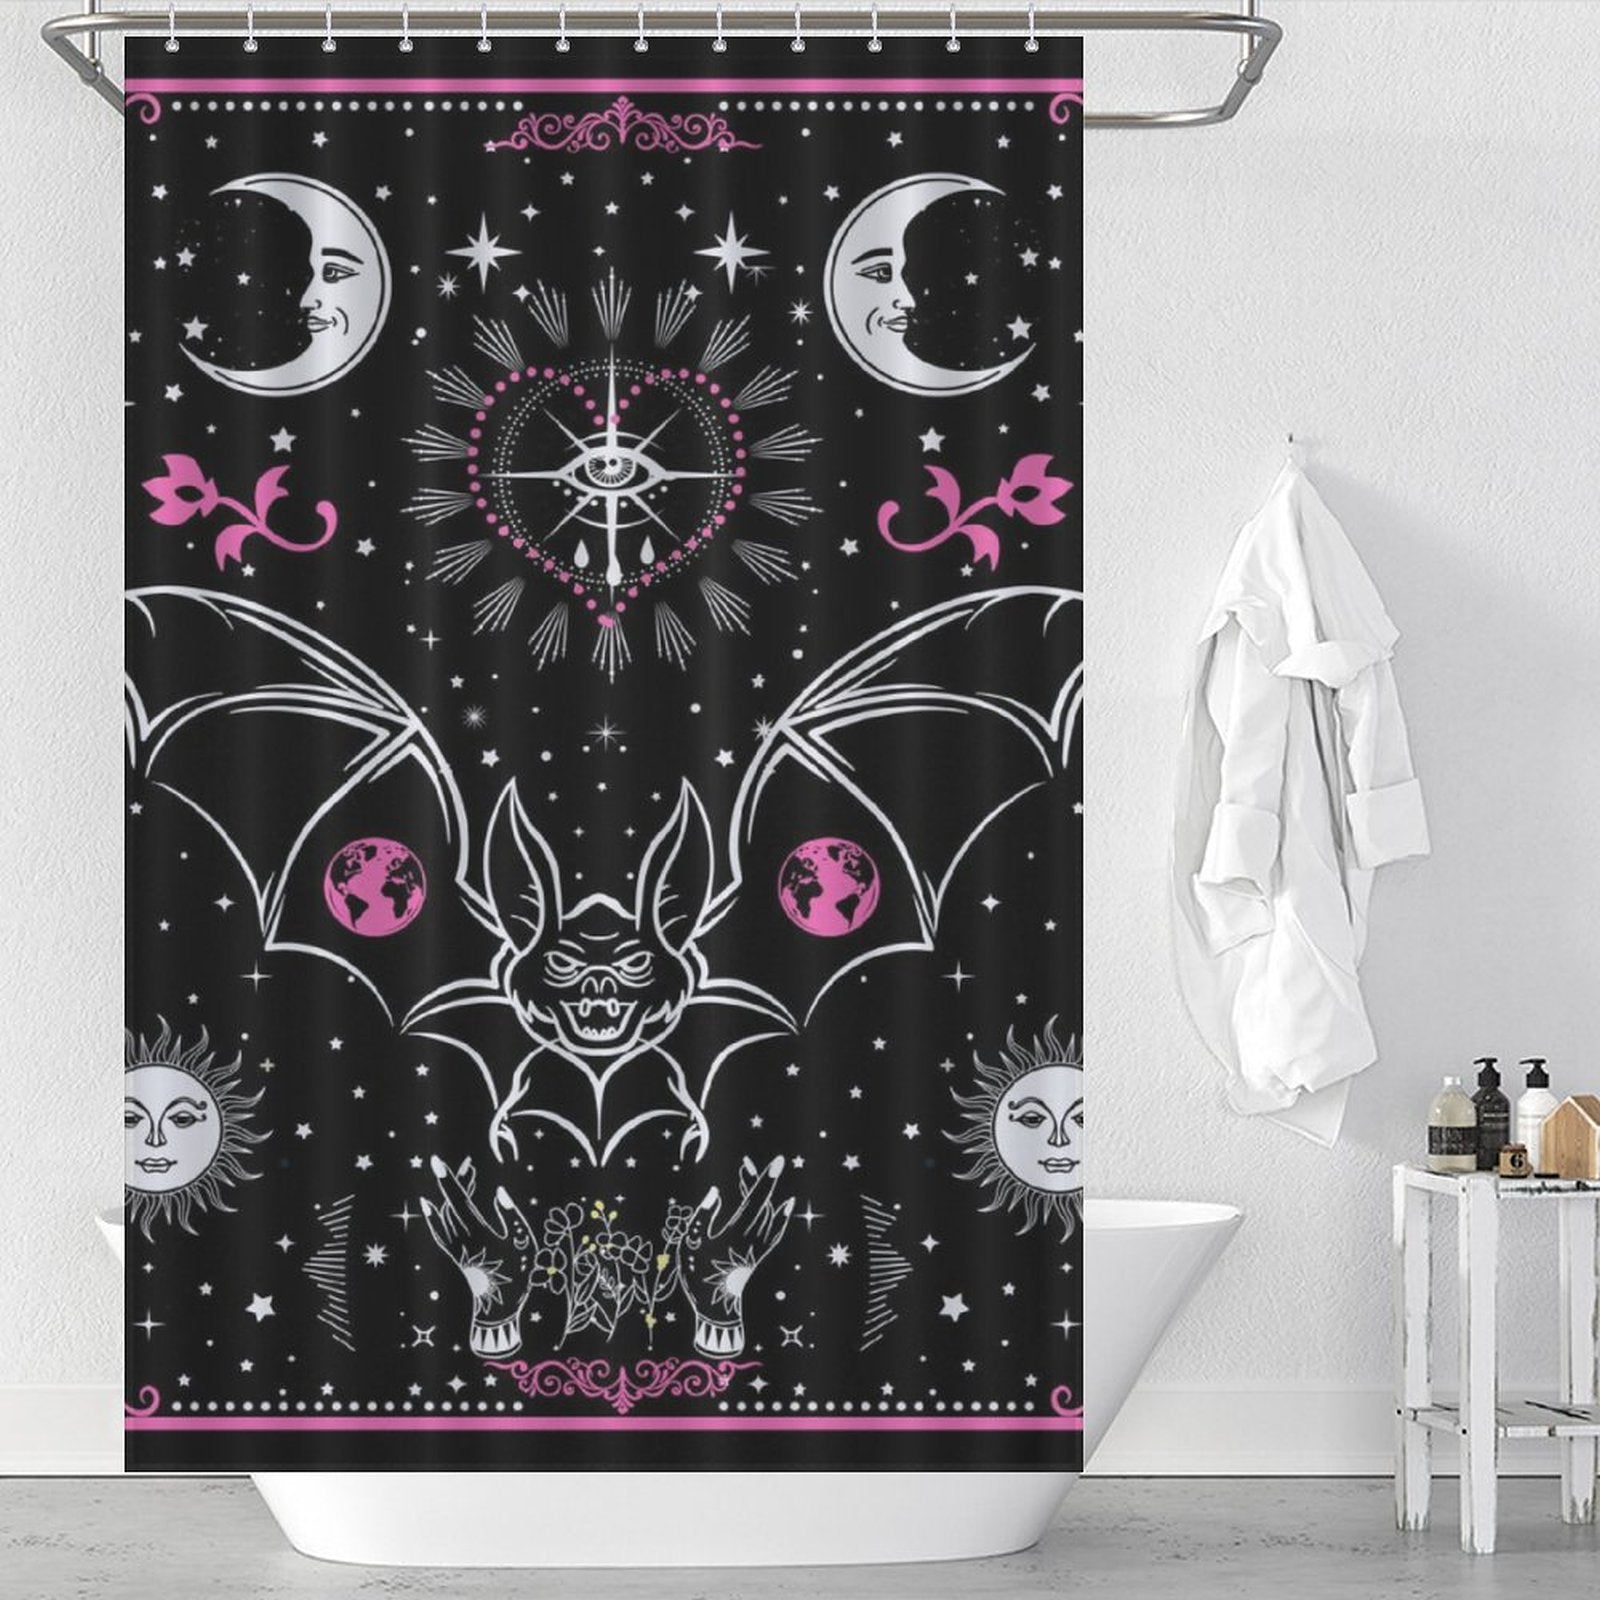 A Tarot Bat Shower Curtain-Cottoncat with bats and moons on it.